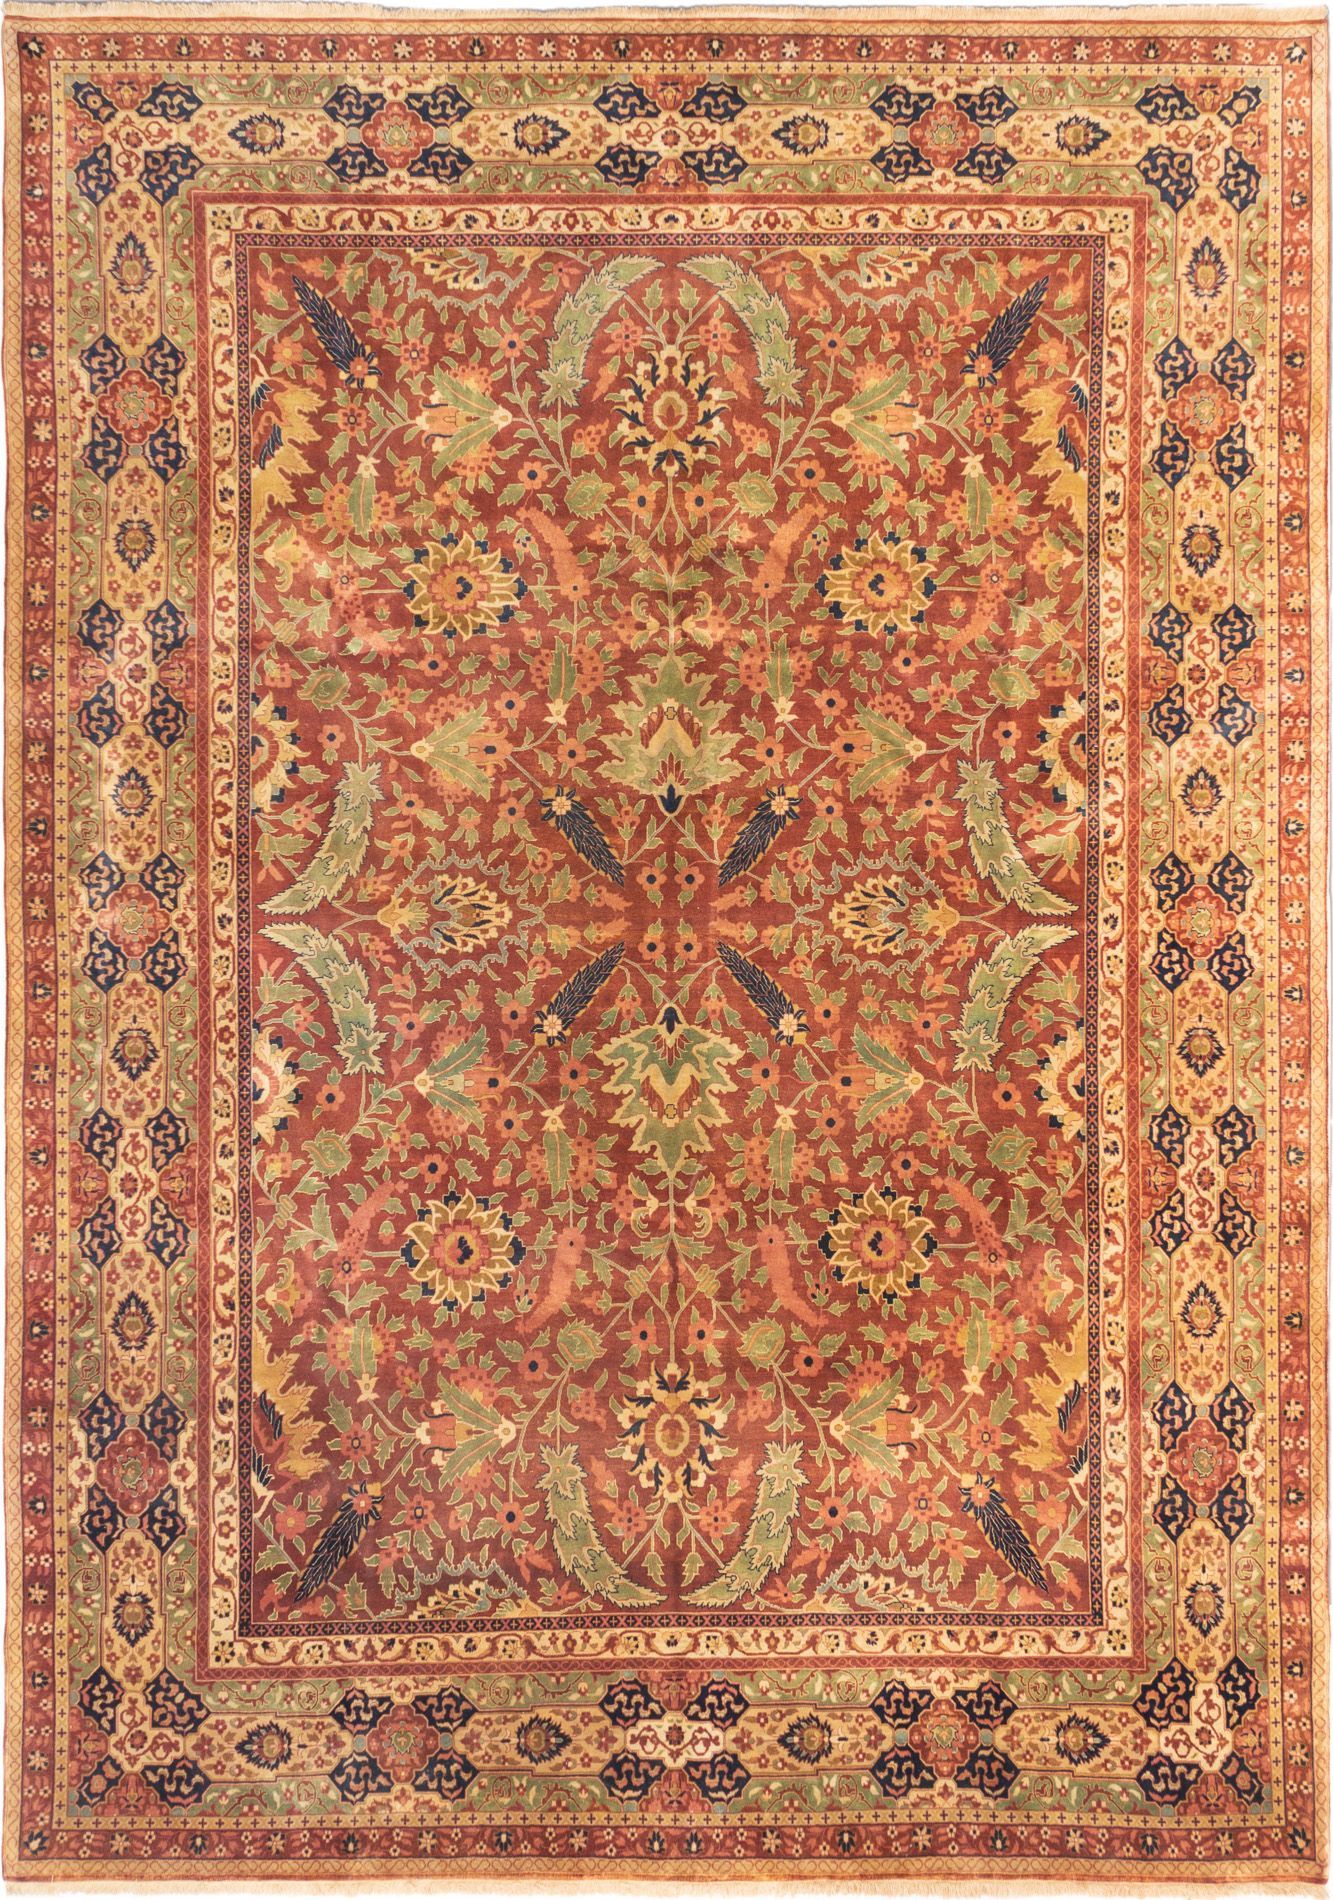 eCarpet Gallery Large Area Rug for Living Room 303090 Chobi Finest Bordered Red Rug 10'0 x 13'10 Hand-Knotted Wool Rug Bedroom 